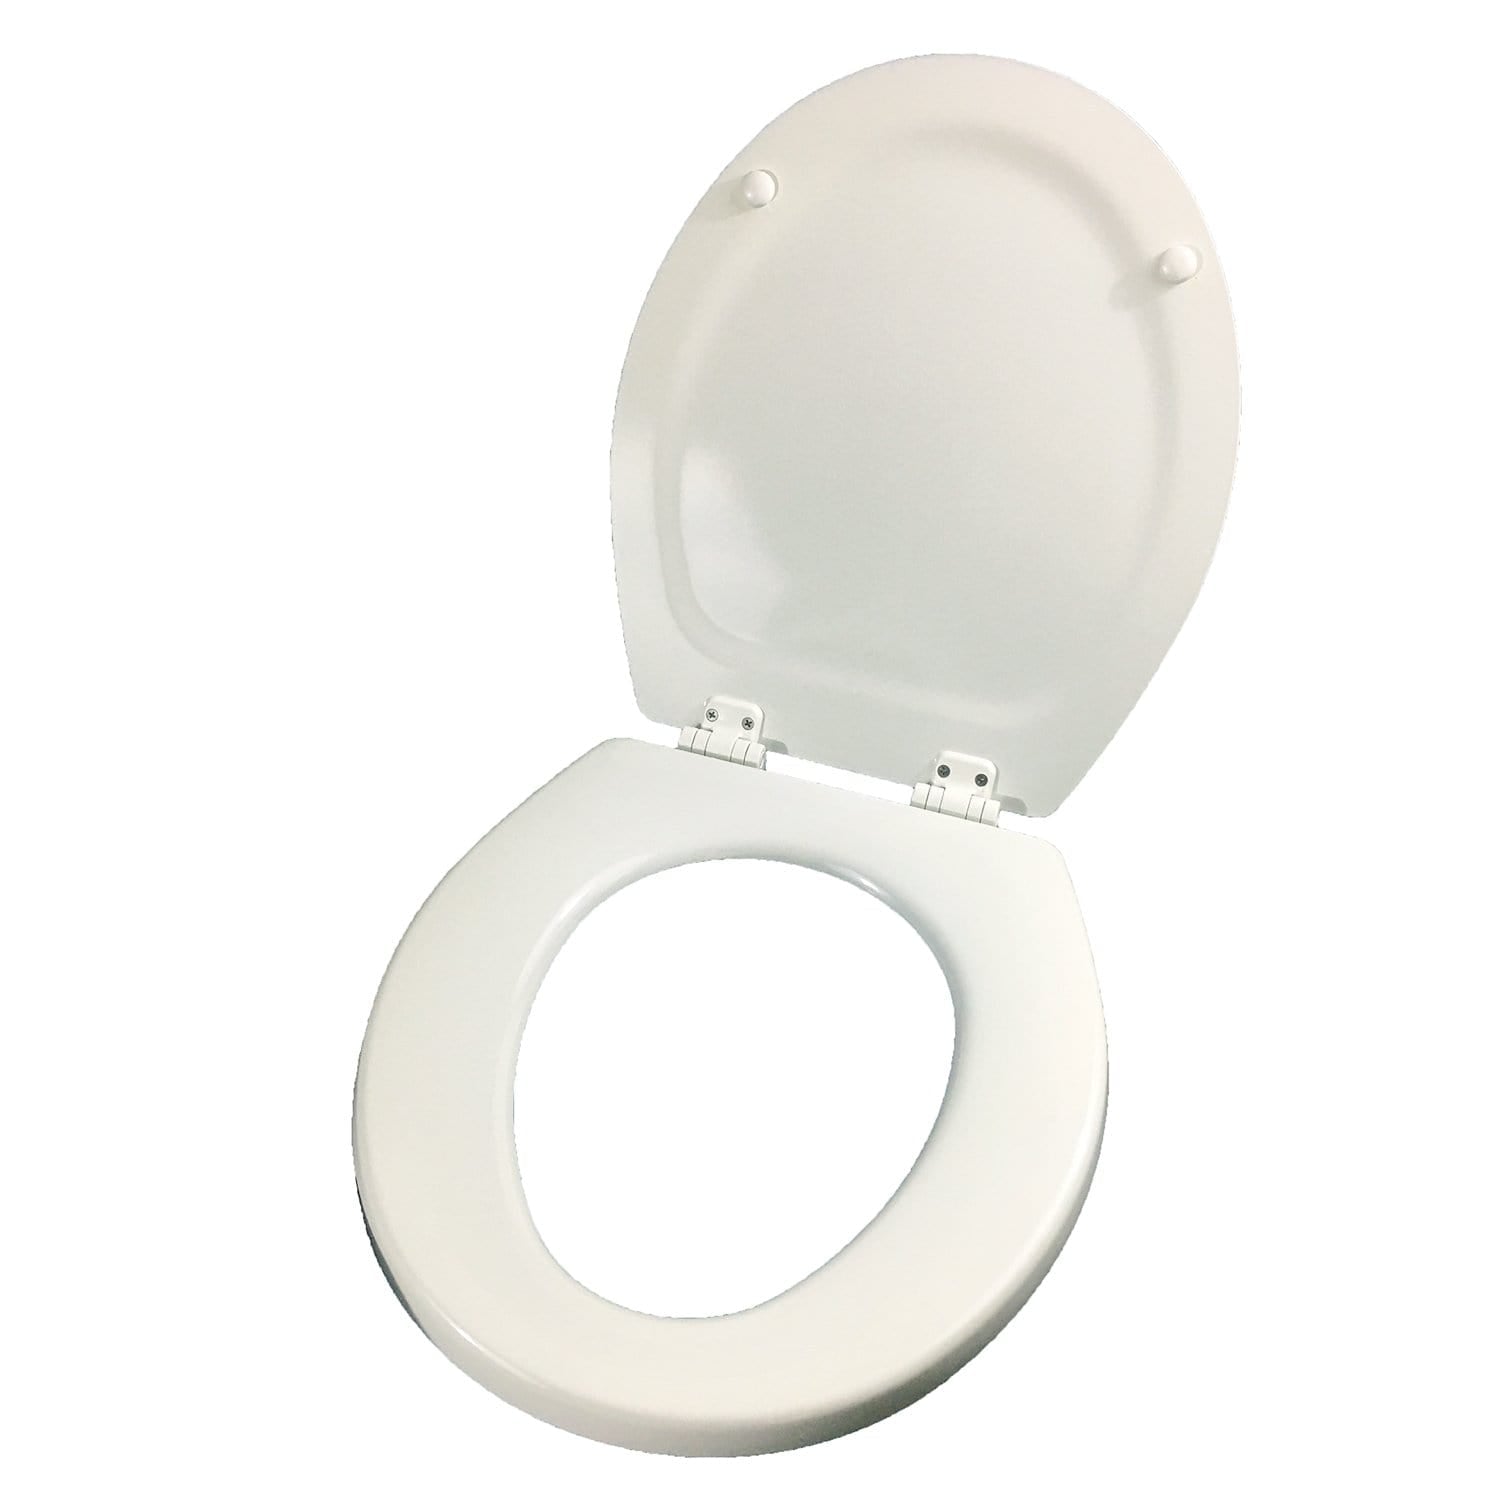 Dometic Sealand 385343829 Toilet Seat and Lid Assembly